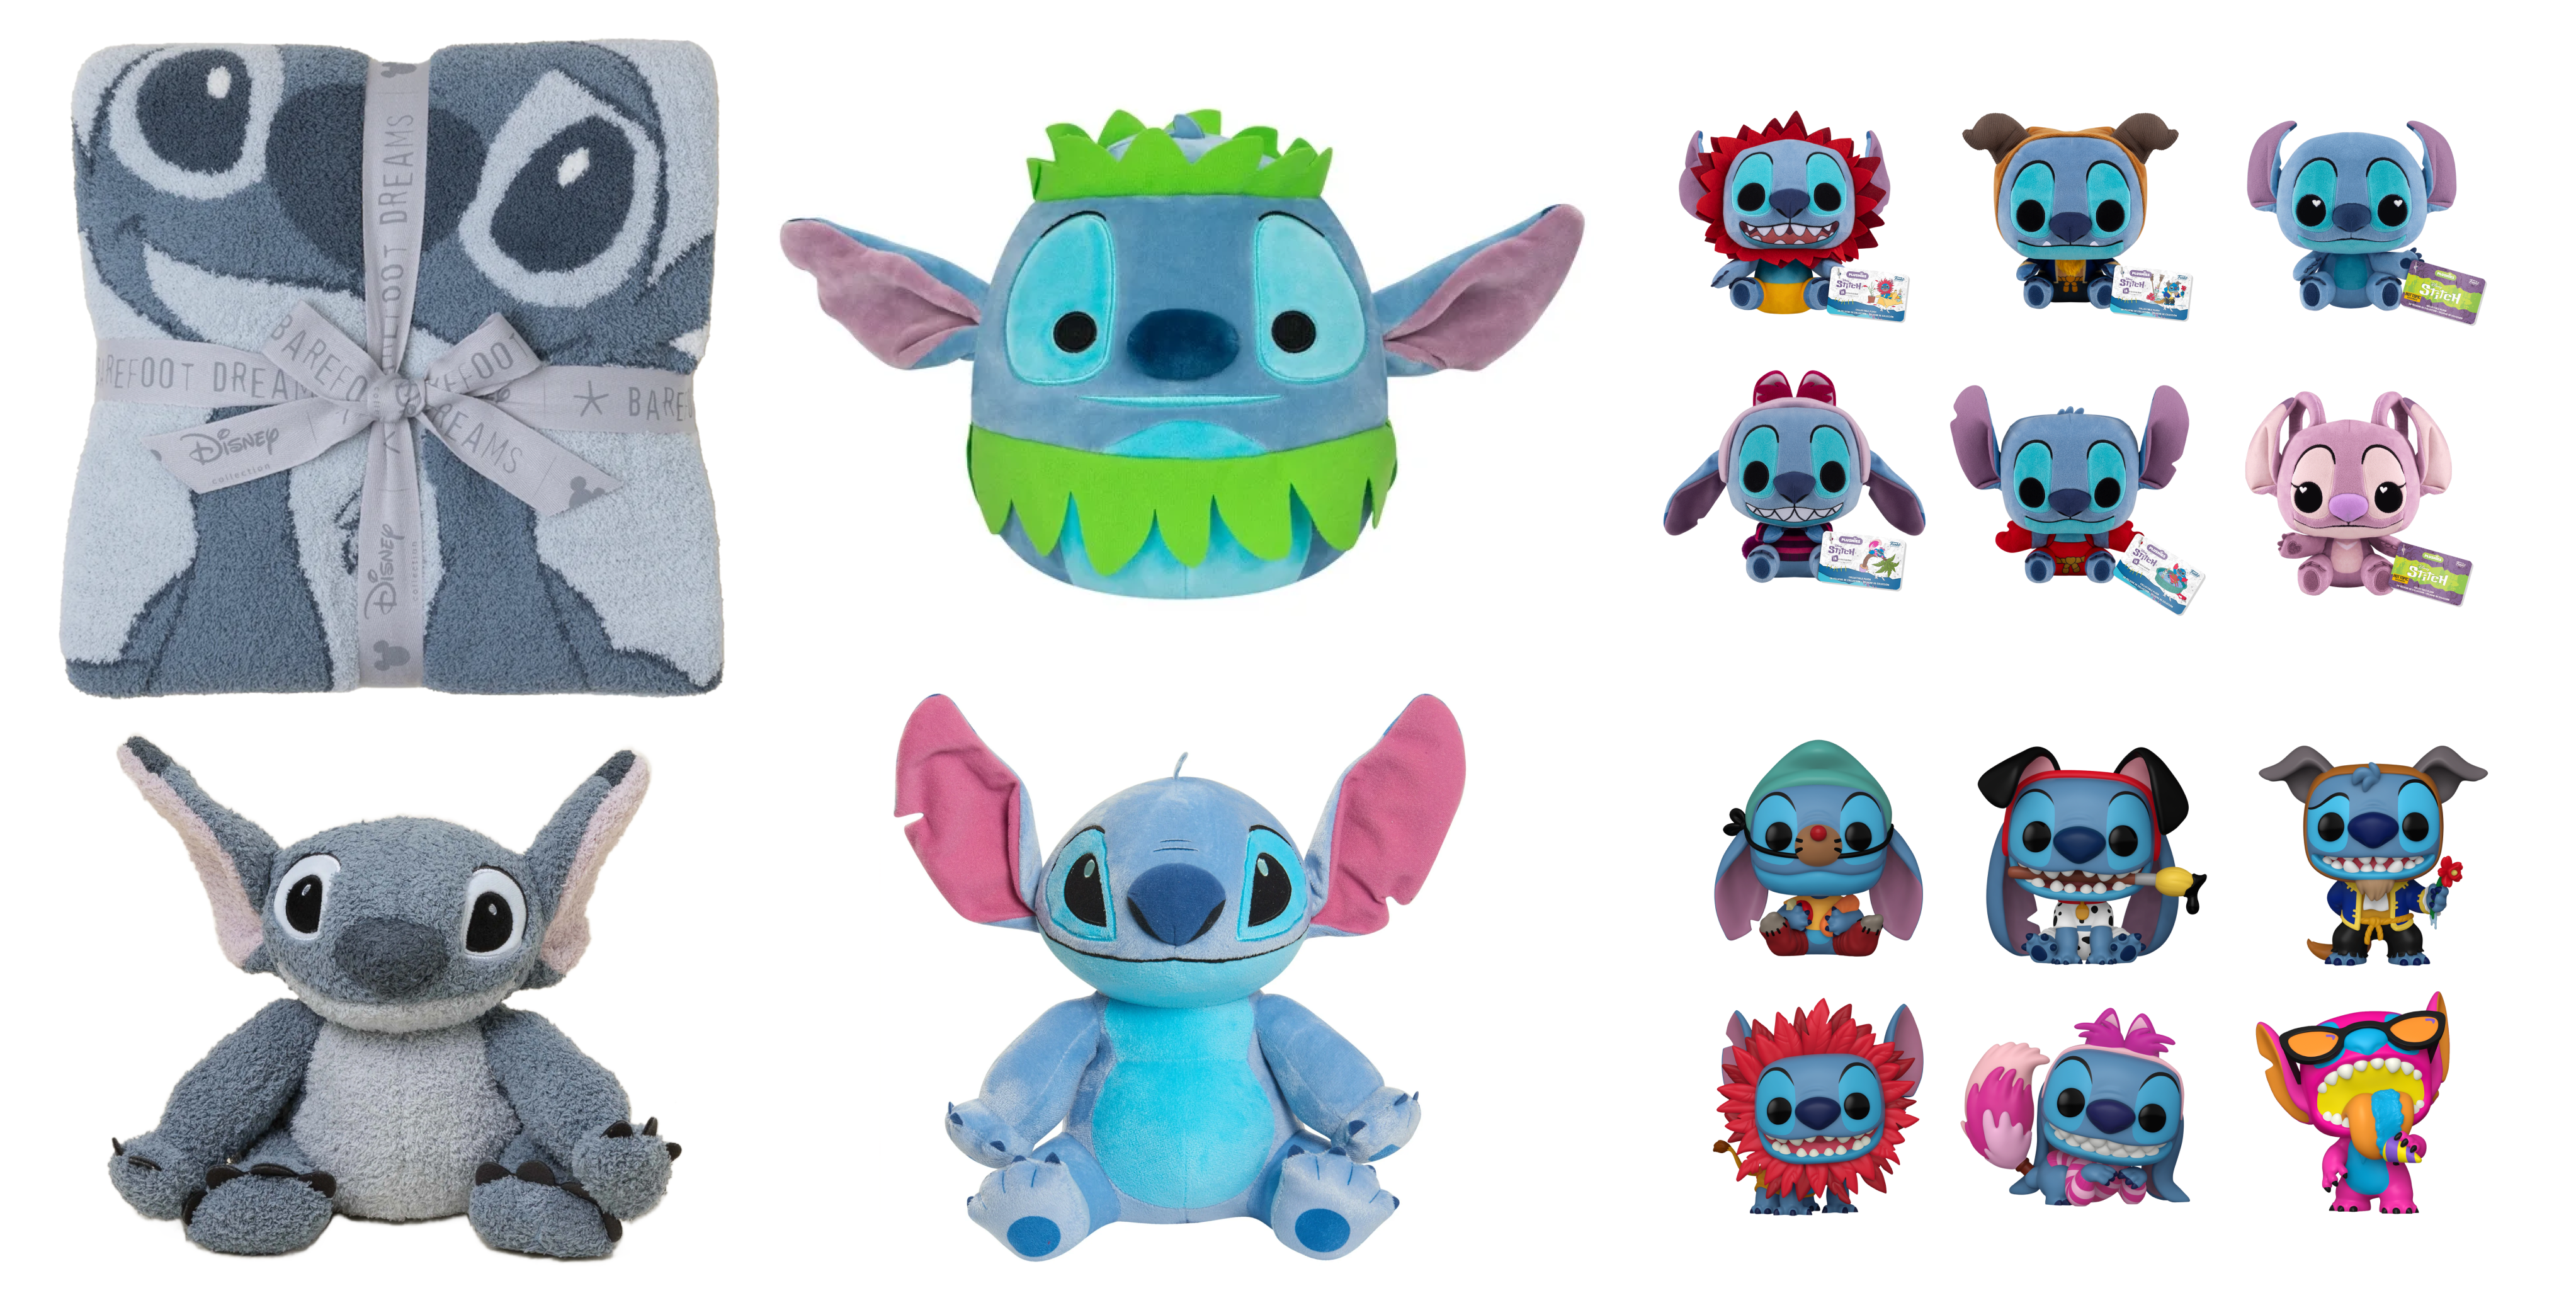 An image featuring many Lilo & Stitch-related items, including Barefoot Dreams Disney Stitch Blanket; Barefoot Dreams Disney Stitch Buddie; Squishmallow Disney Stitch 8-inch Hula Plush; Disney Stitch Plush; and Collections by Funko of Stitch as Plush and Stitch as Pop!.